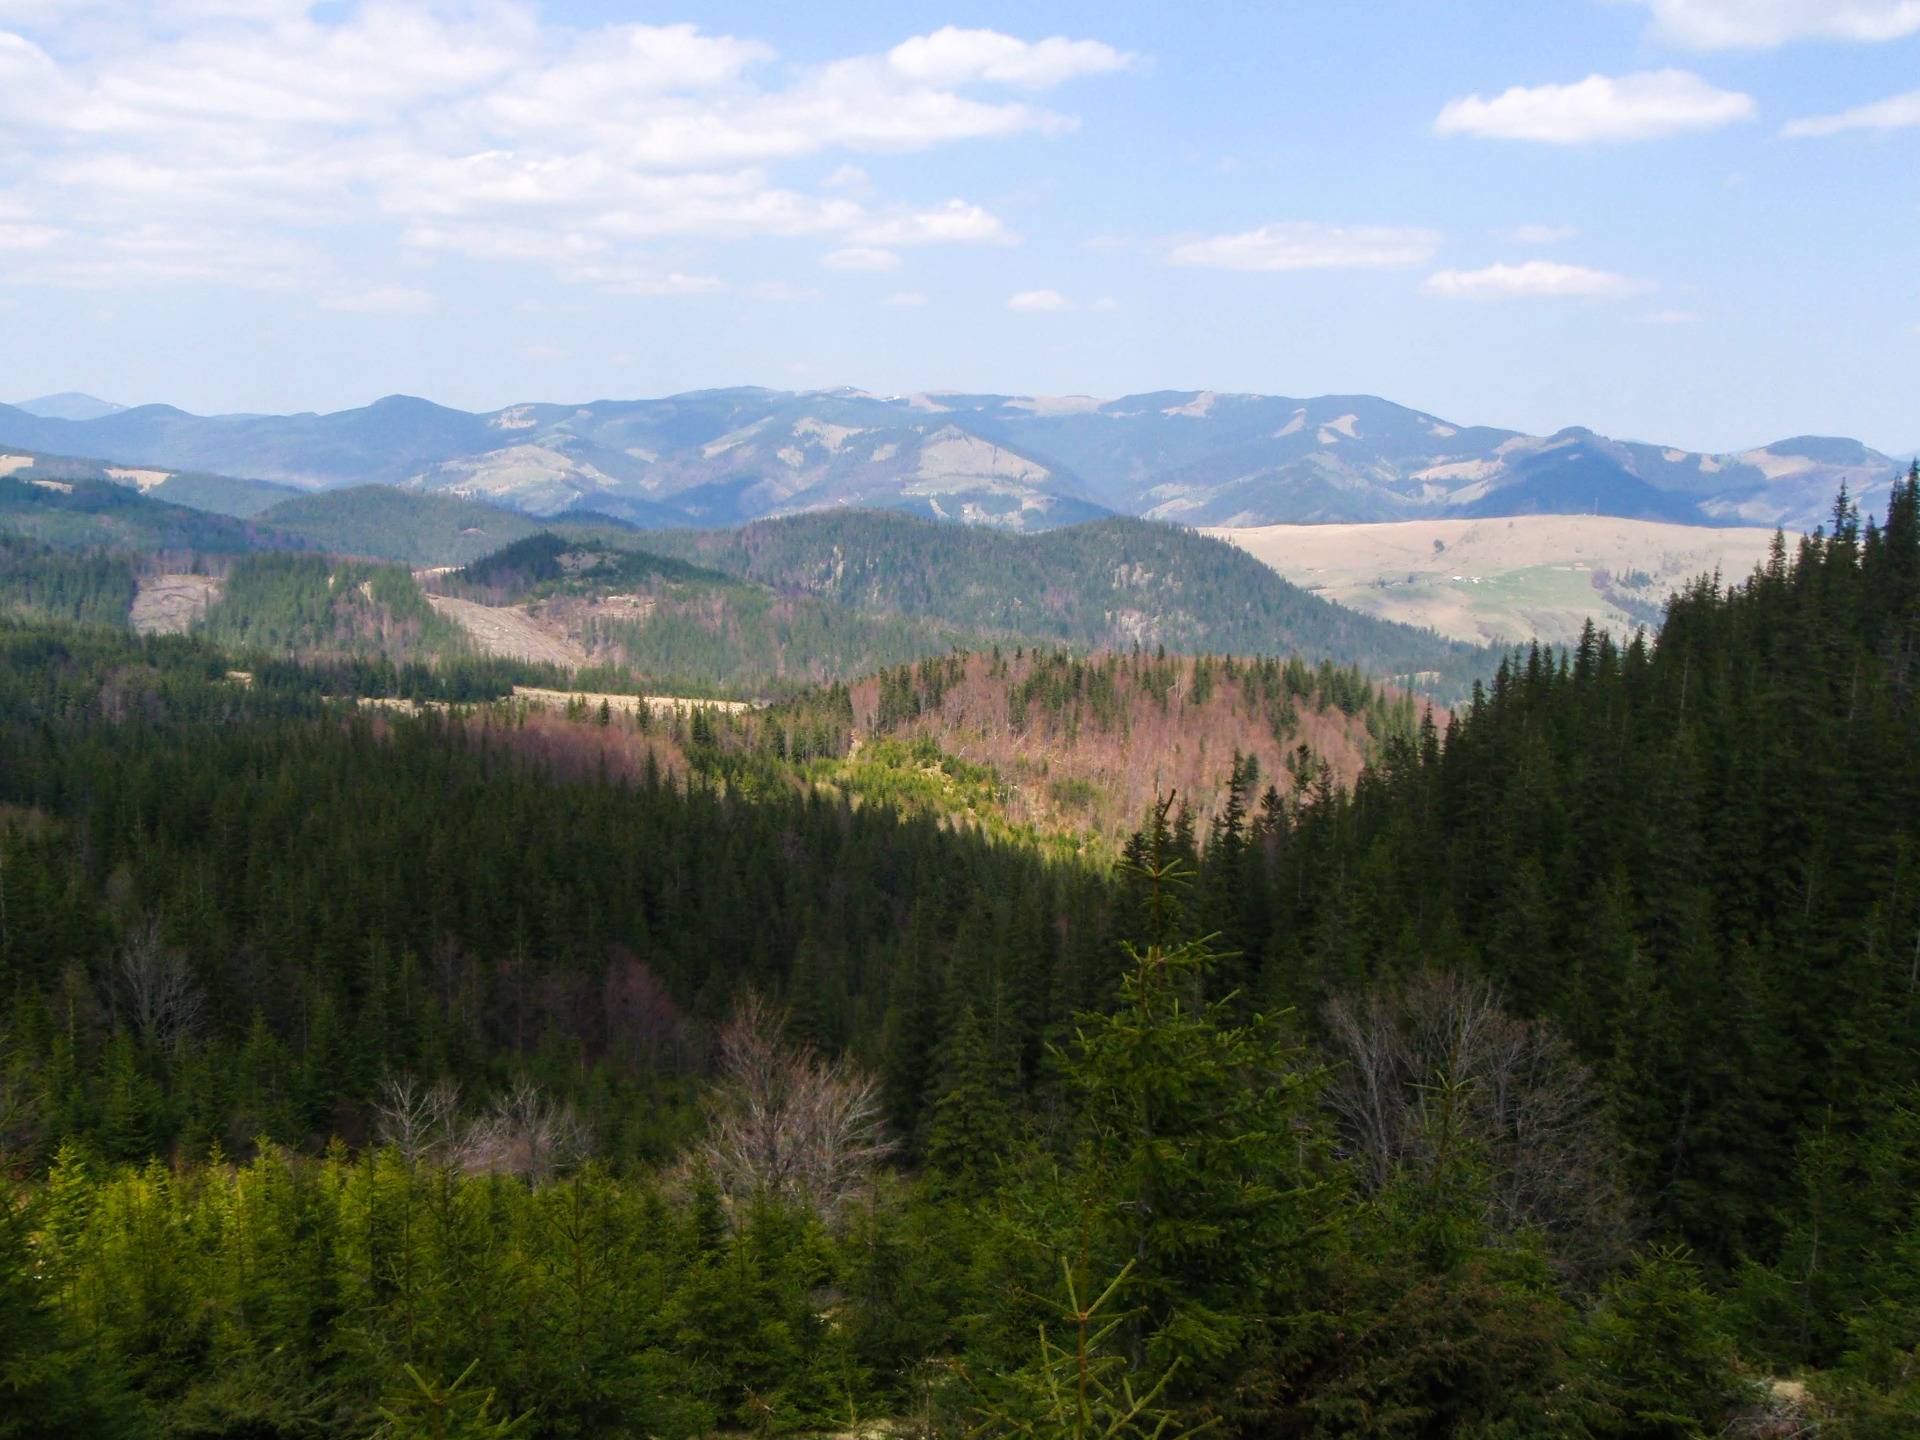 The slopes of the mountains covered with coniferous forest